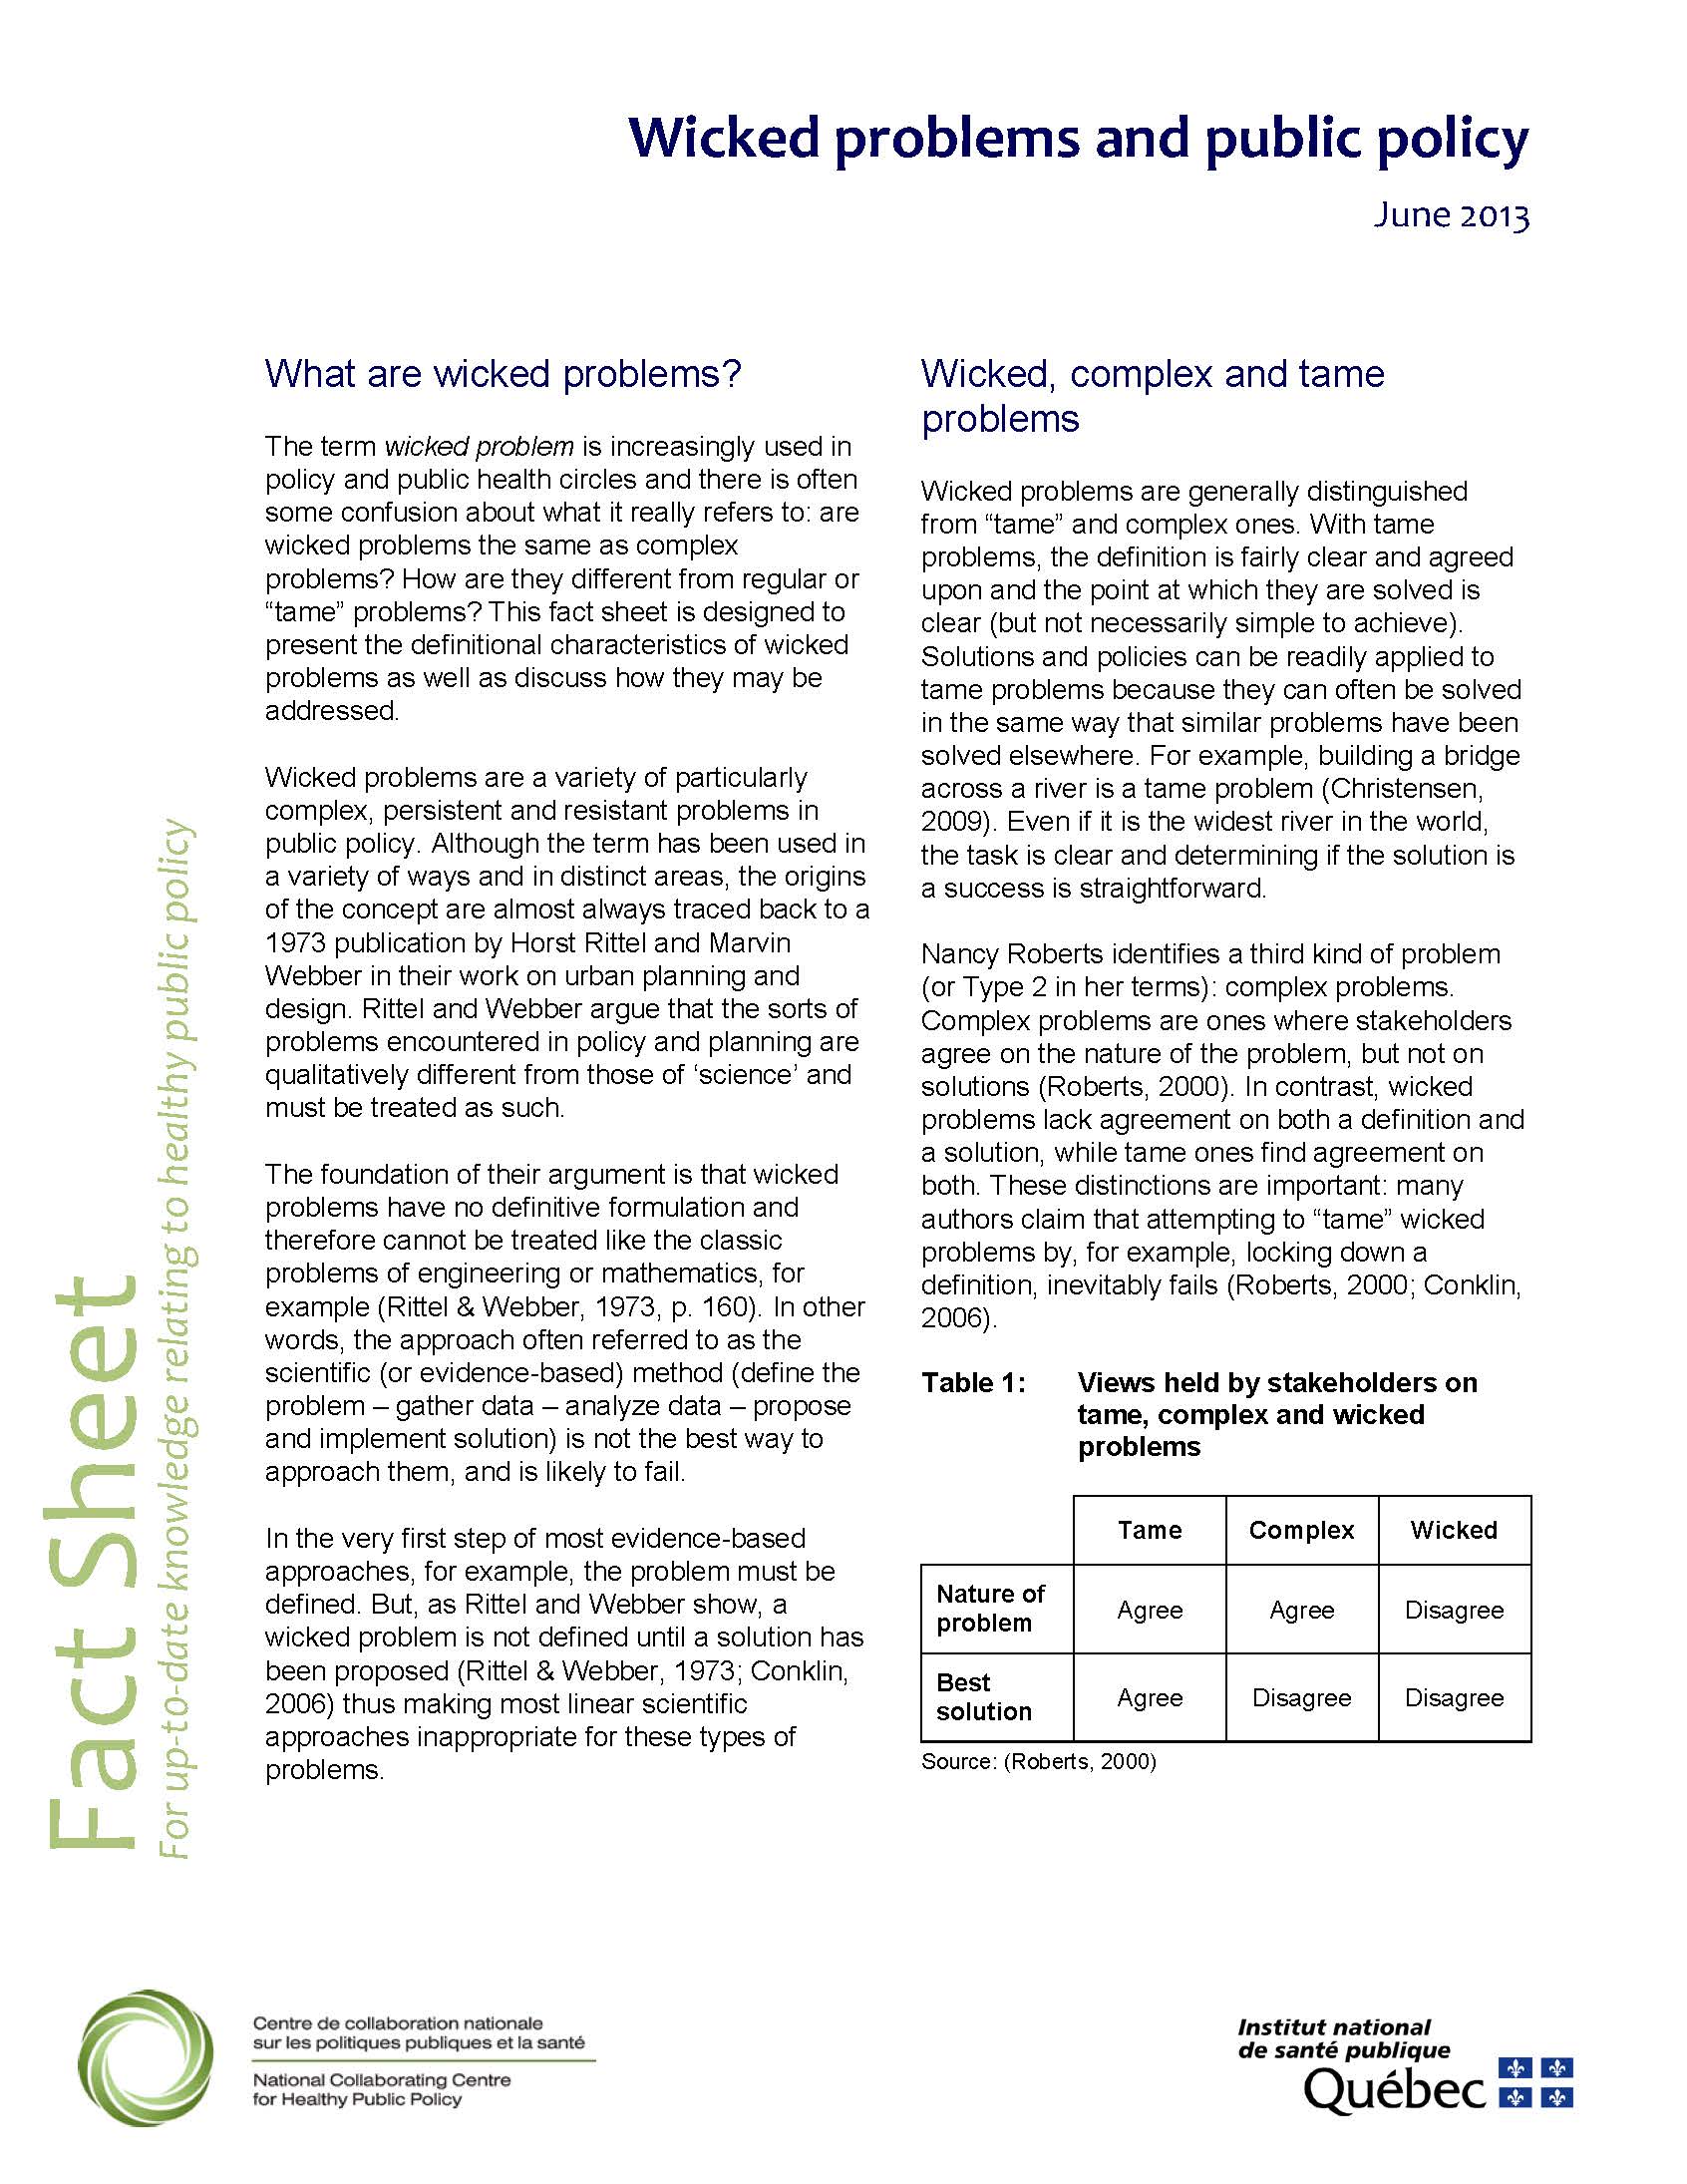 Wicked Problems and Public Policy